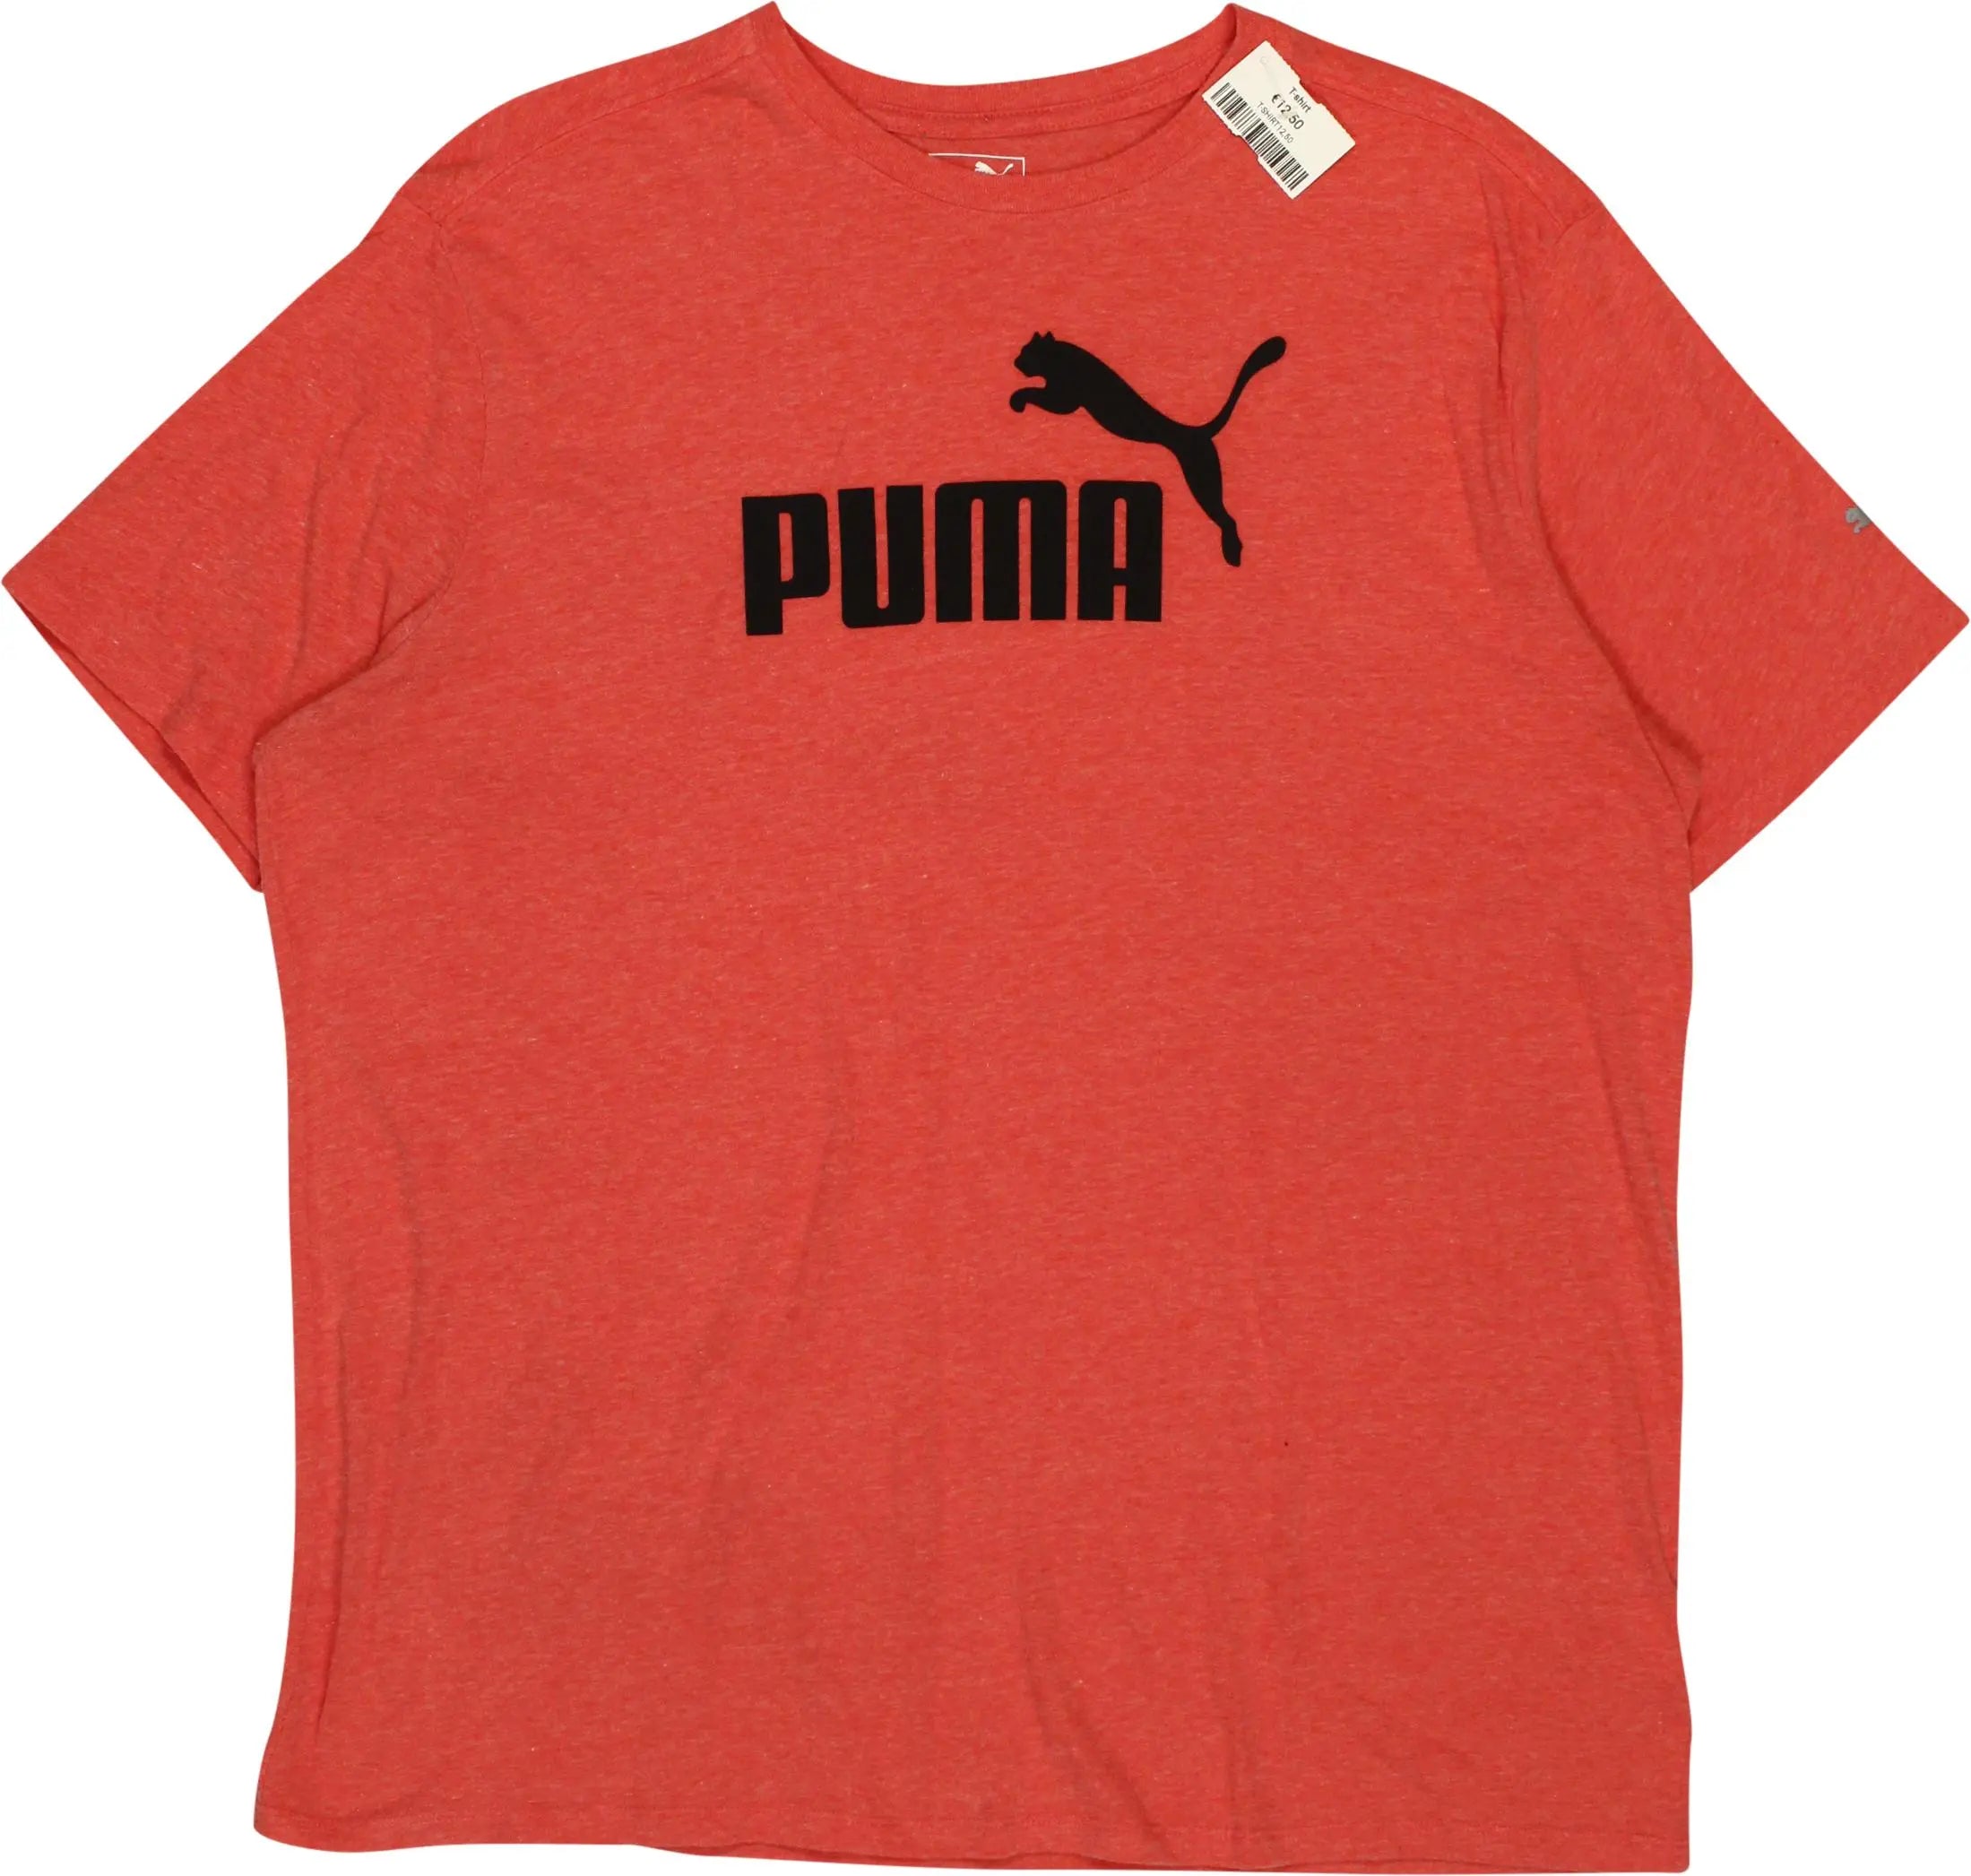 Puma - T-shirt- ThriftTale.com - Vintage and second handclothing